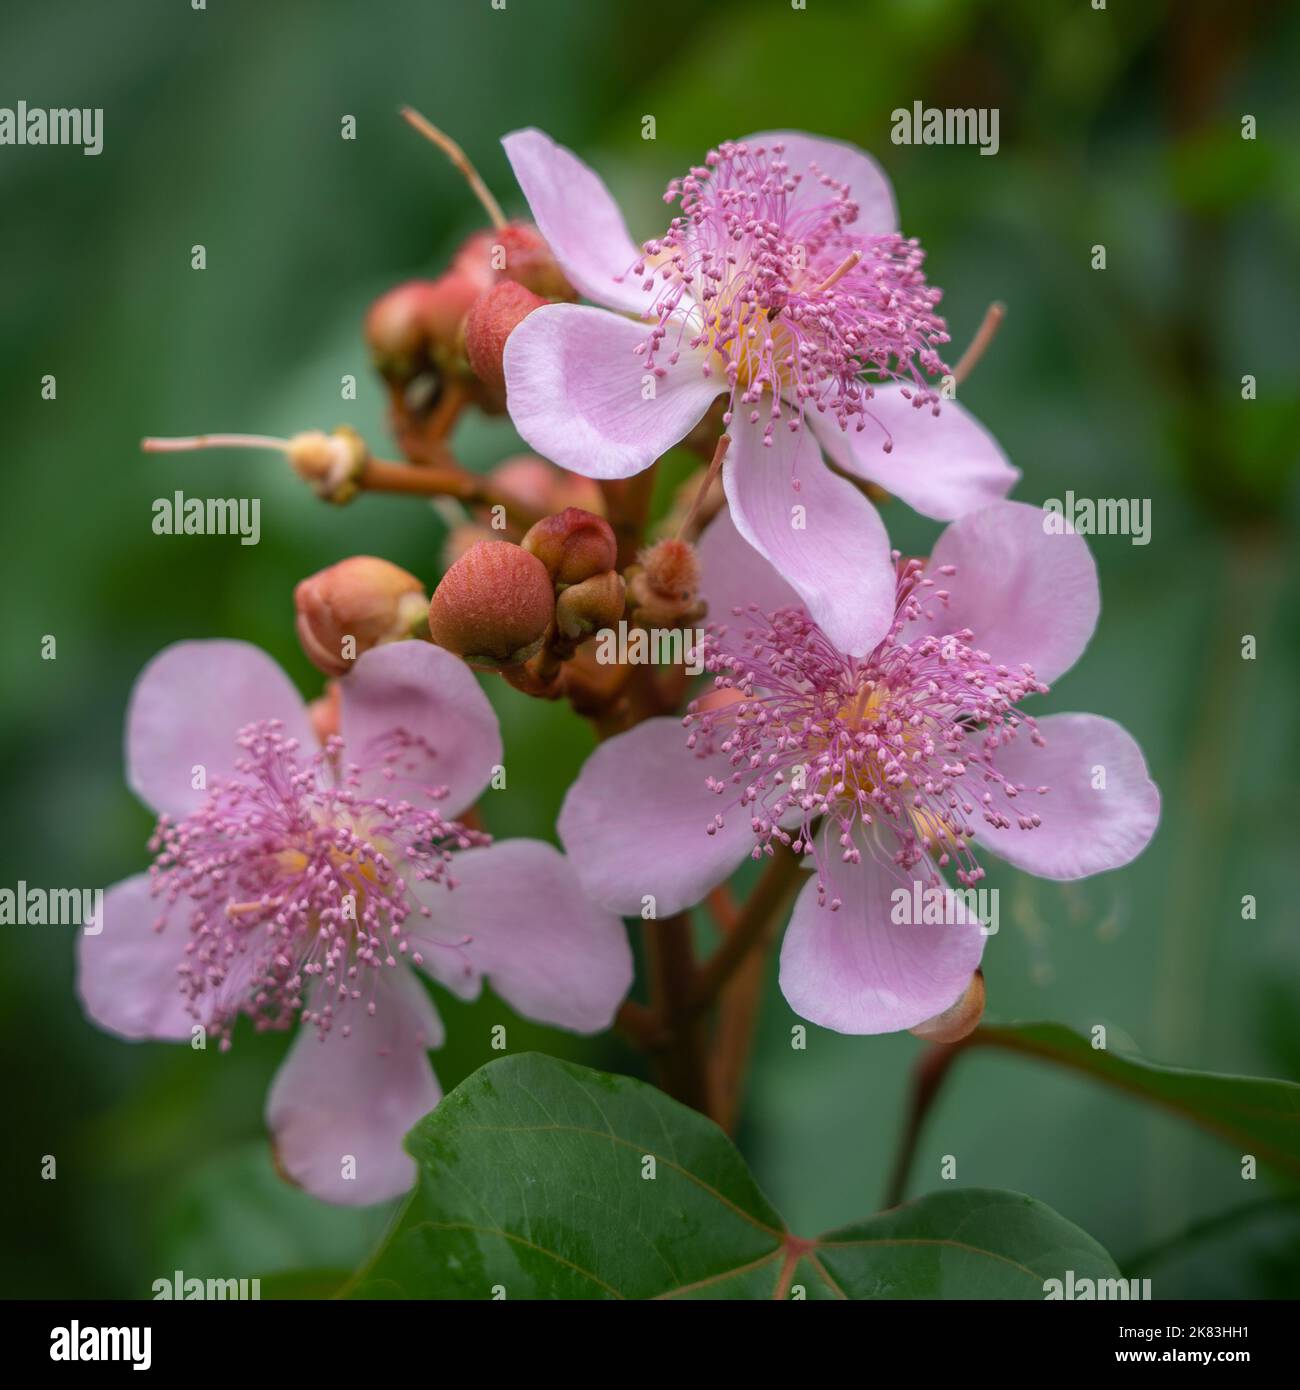 Closeup view of achiote or bixa orellana cluster of pink flowers and buds outdoors on green natural background Stock Photo